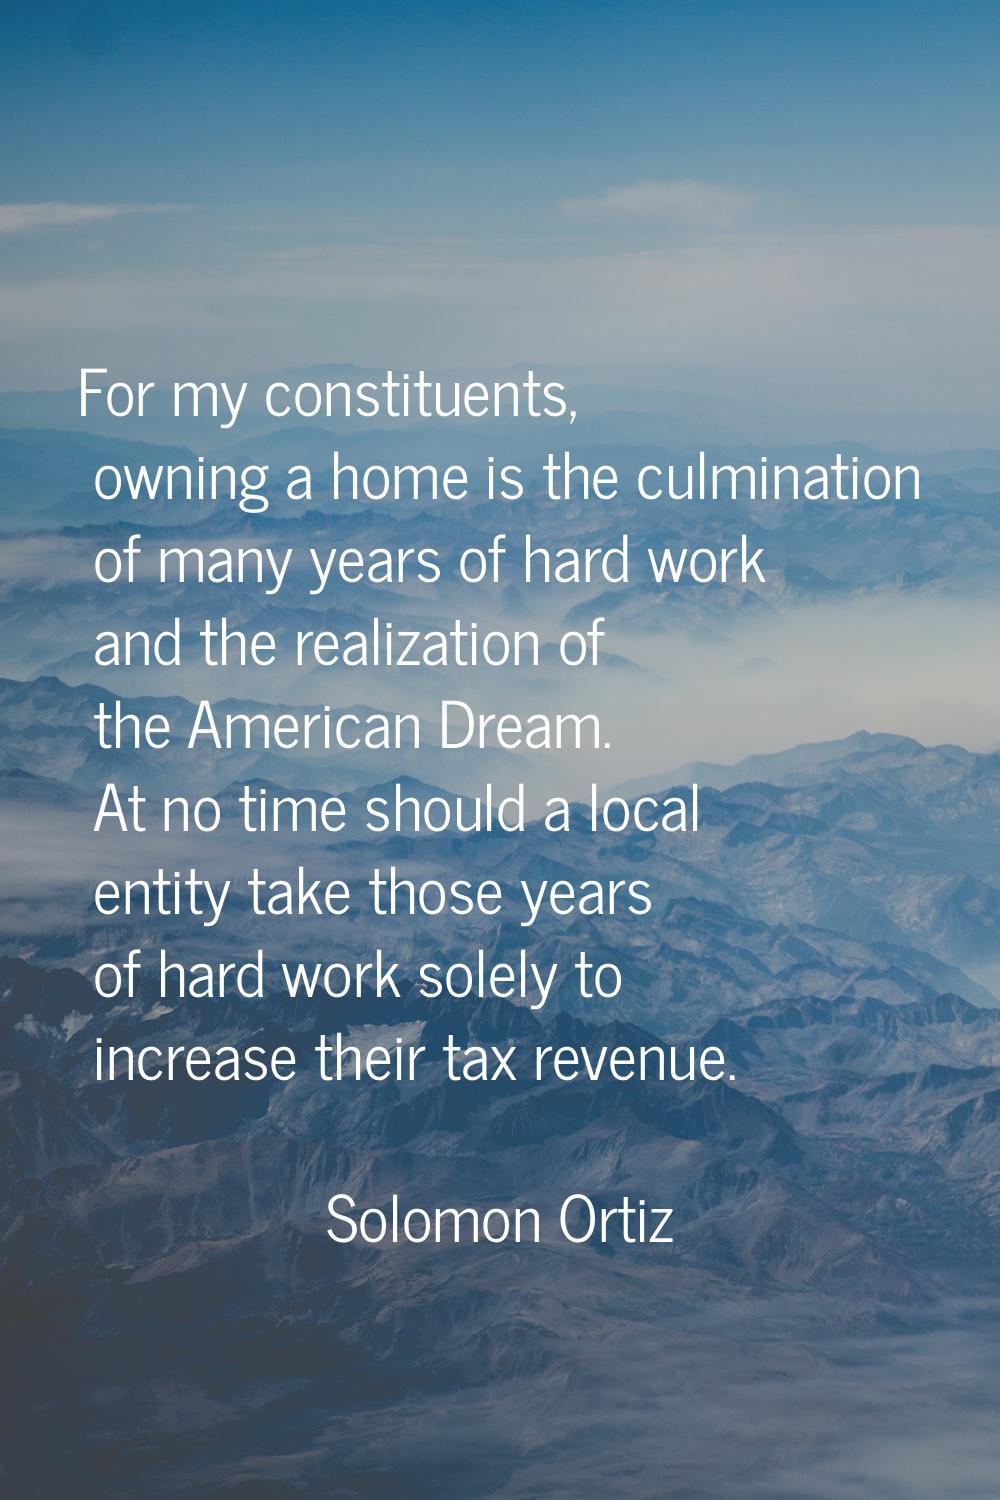 For my constituents, owning a home is the culmination of many years of hard work and the realizatio